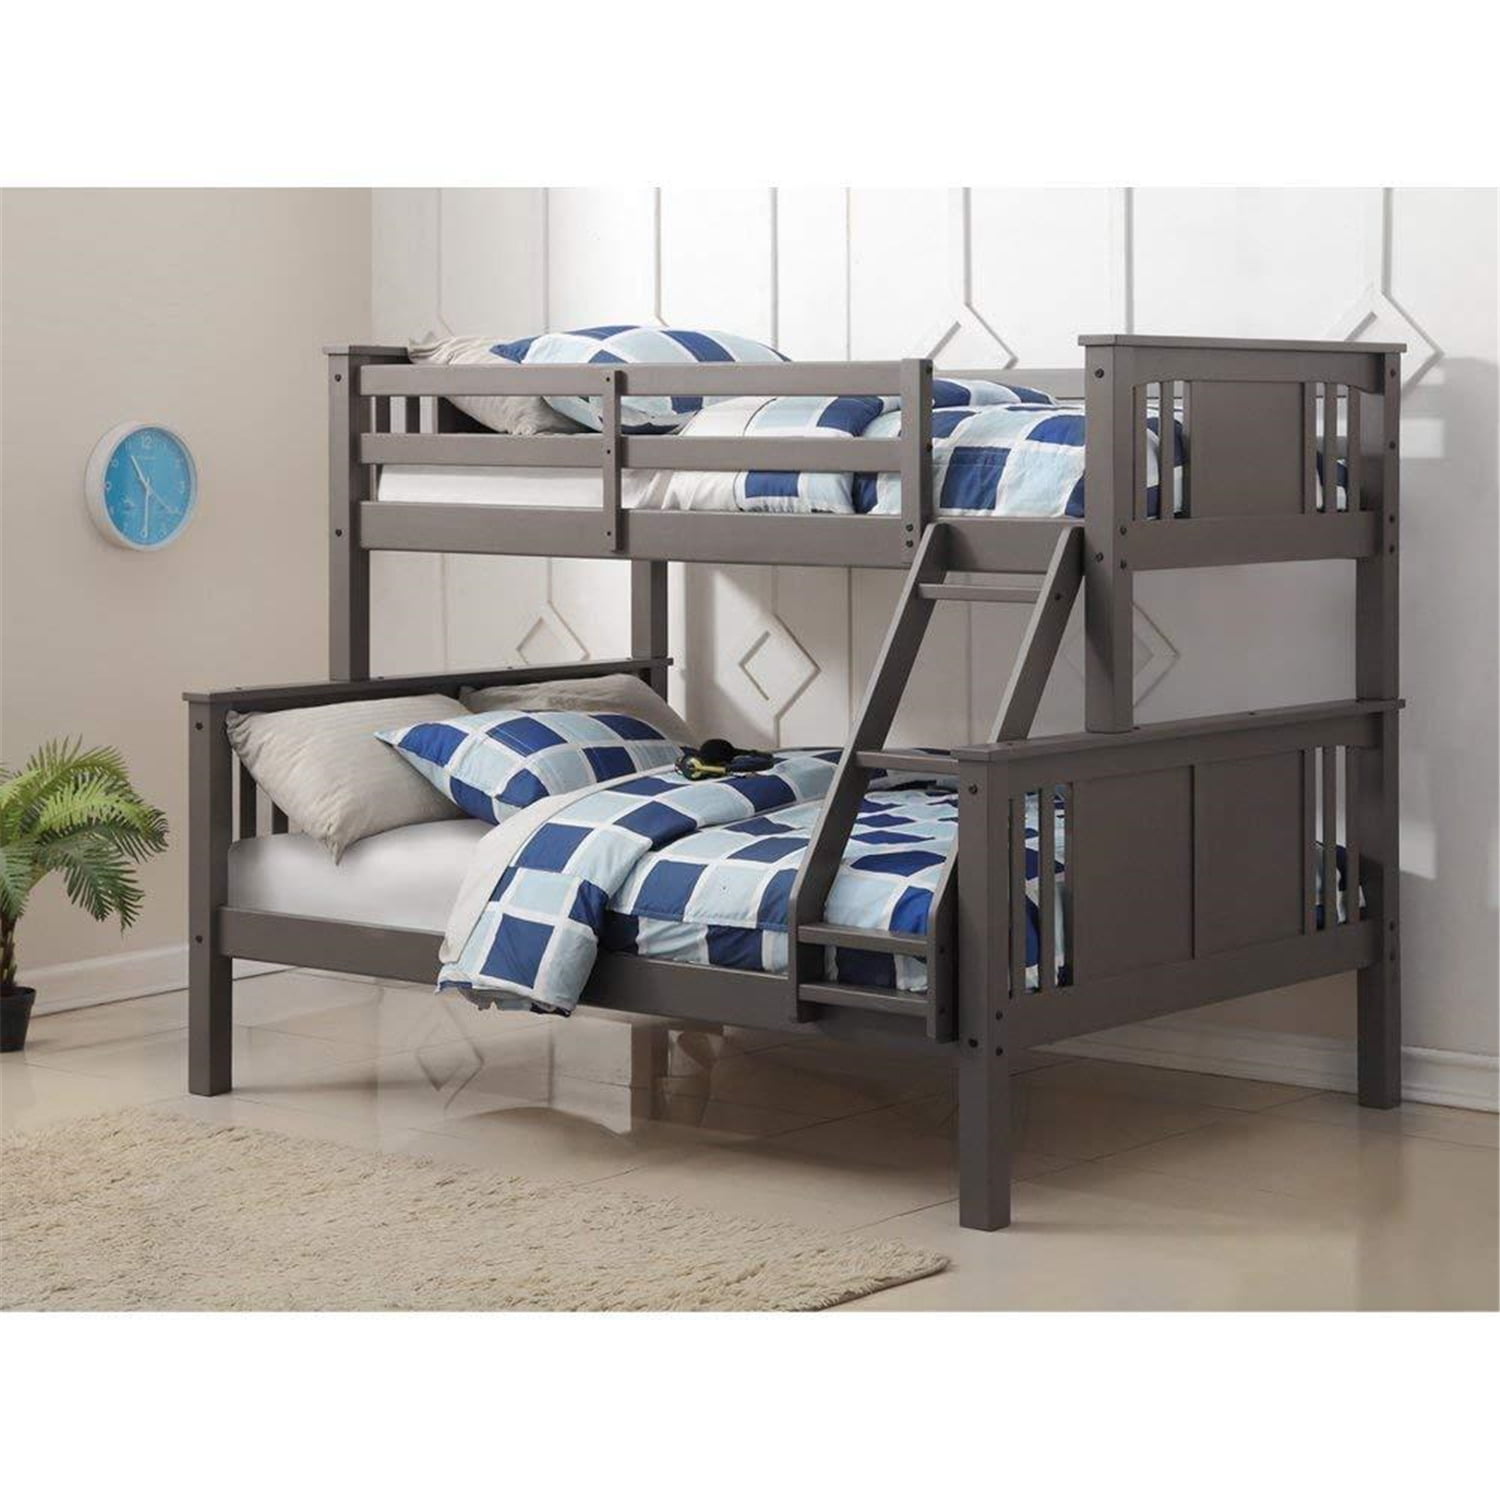 Donco Kids Princeton Wood Bunk Bed Twin, Donco Twin Over Full Bunk Bed